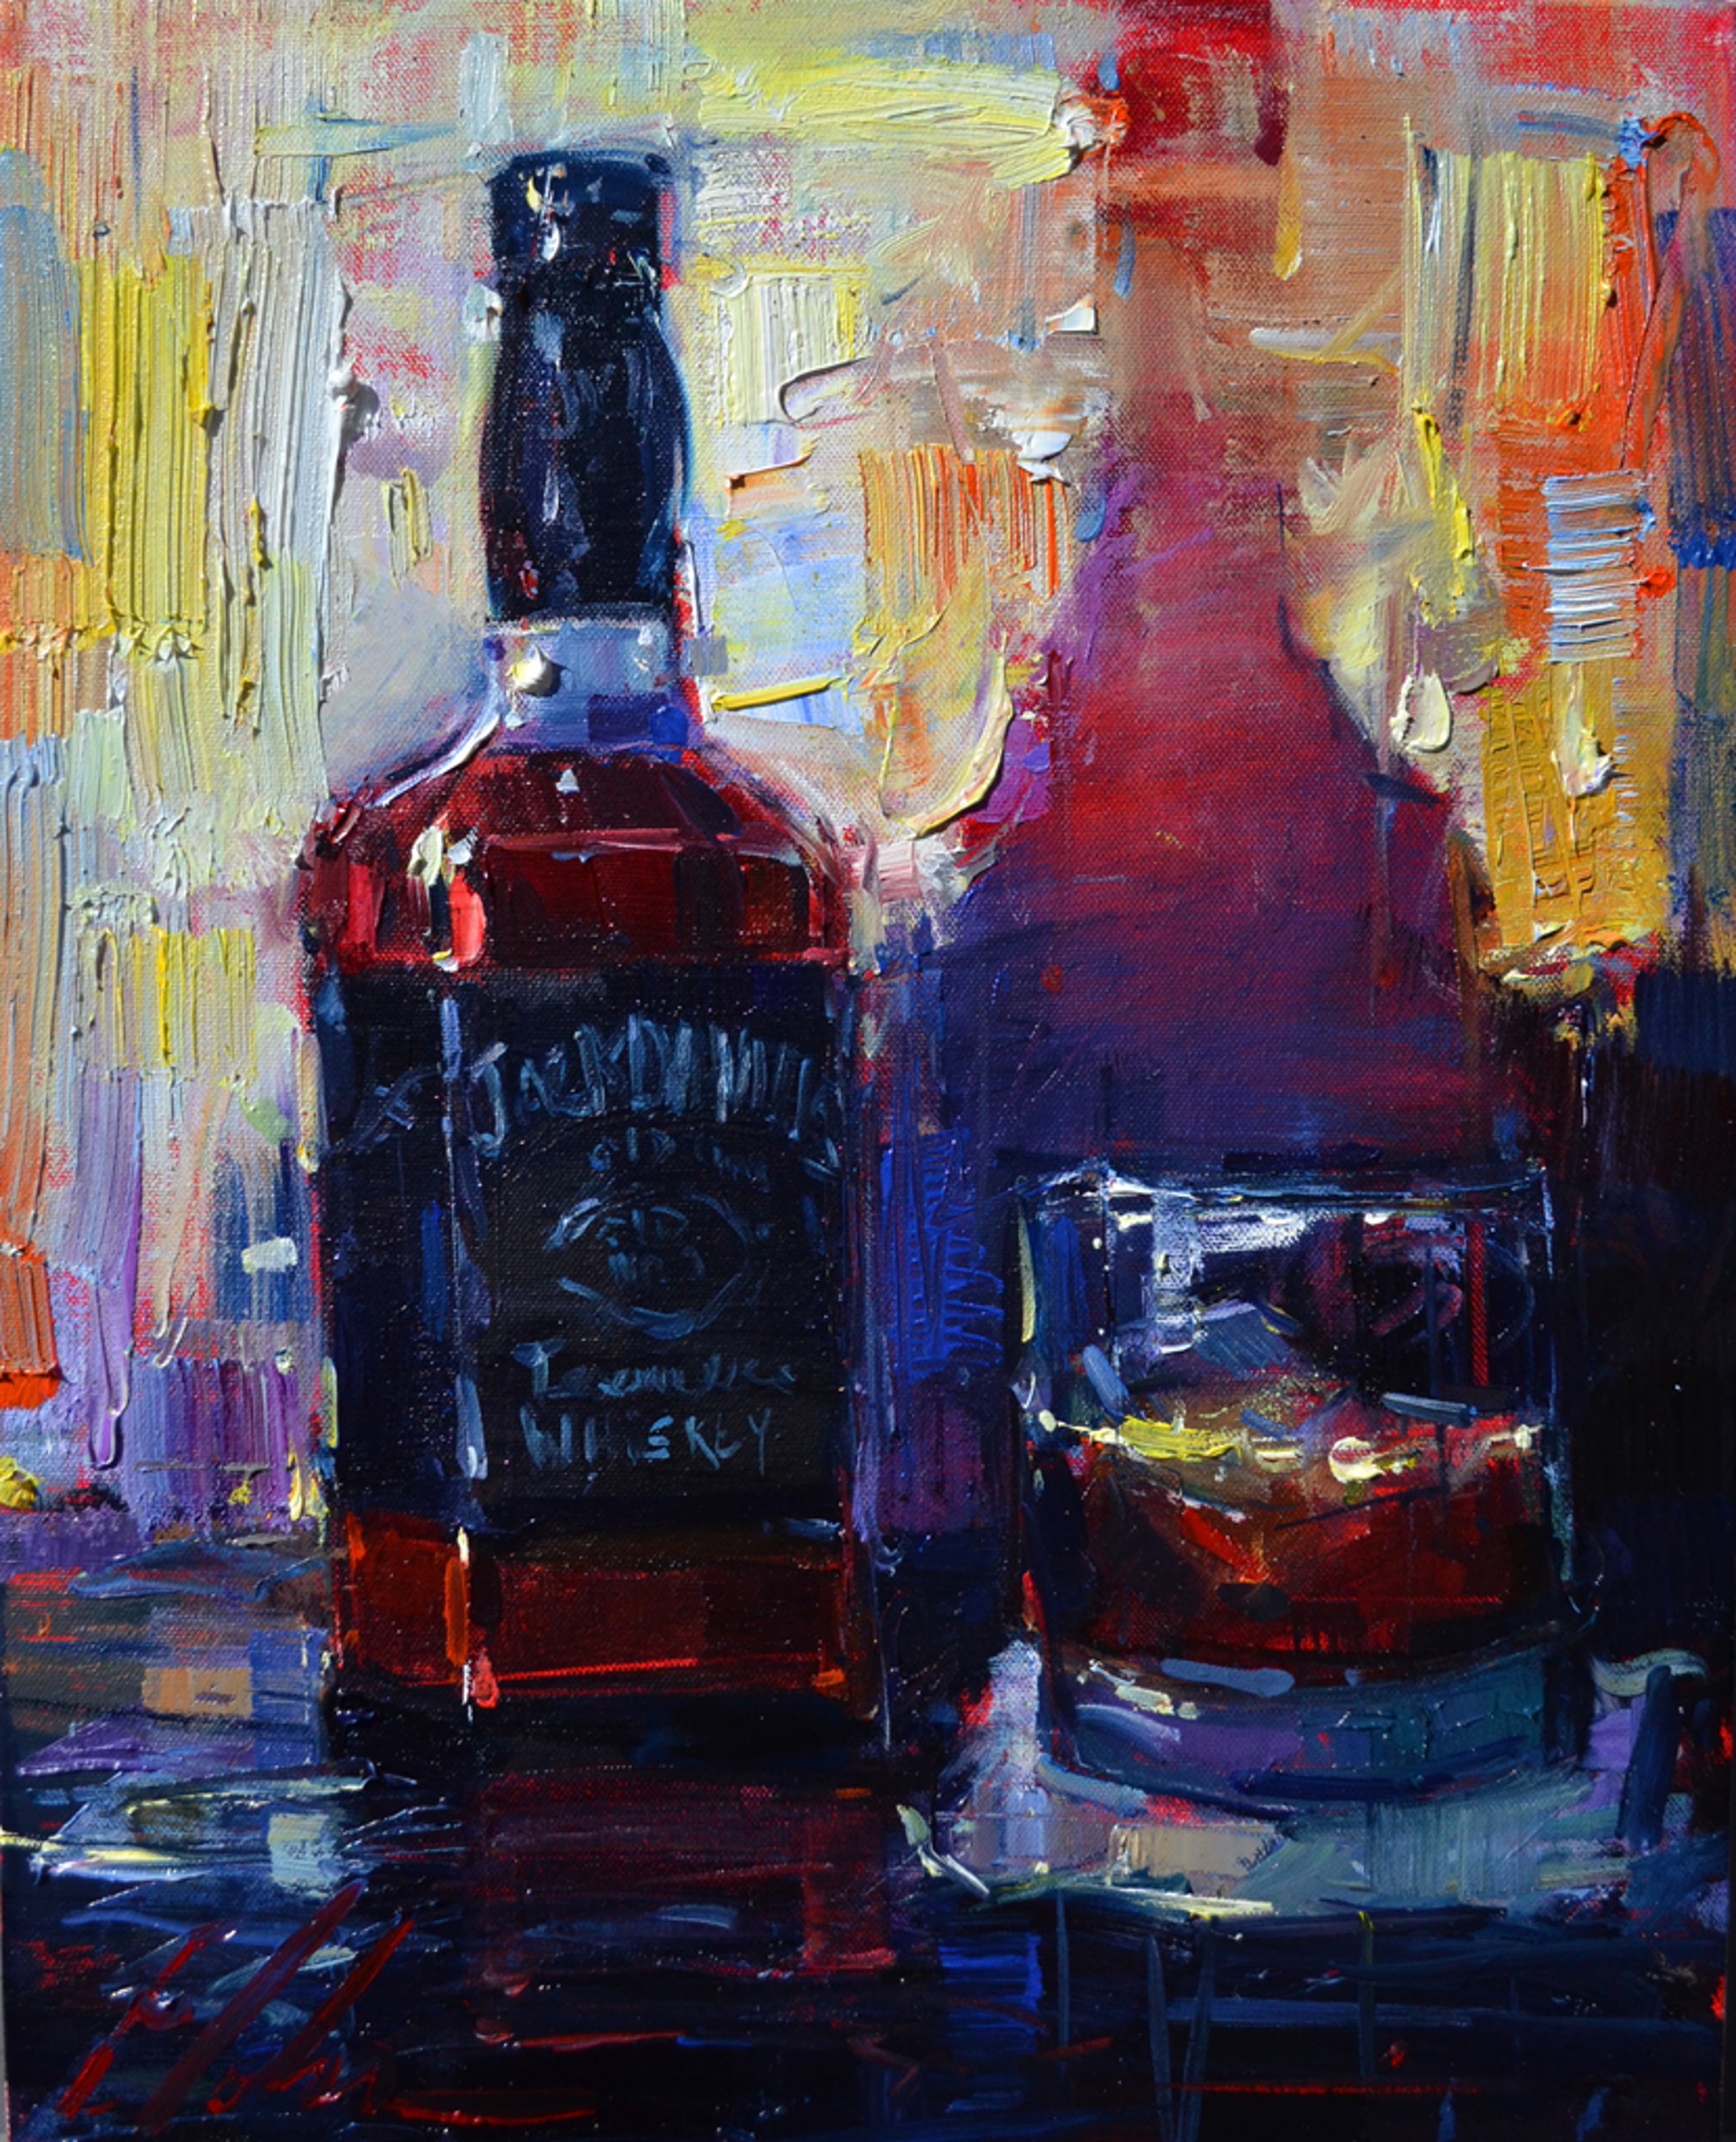 Jack On The Rocks by Michael Flohr